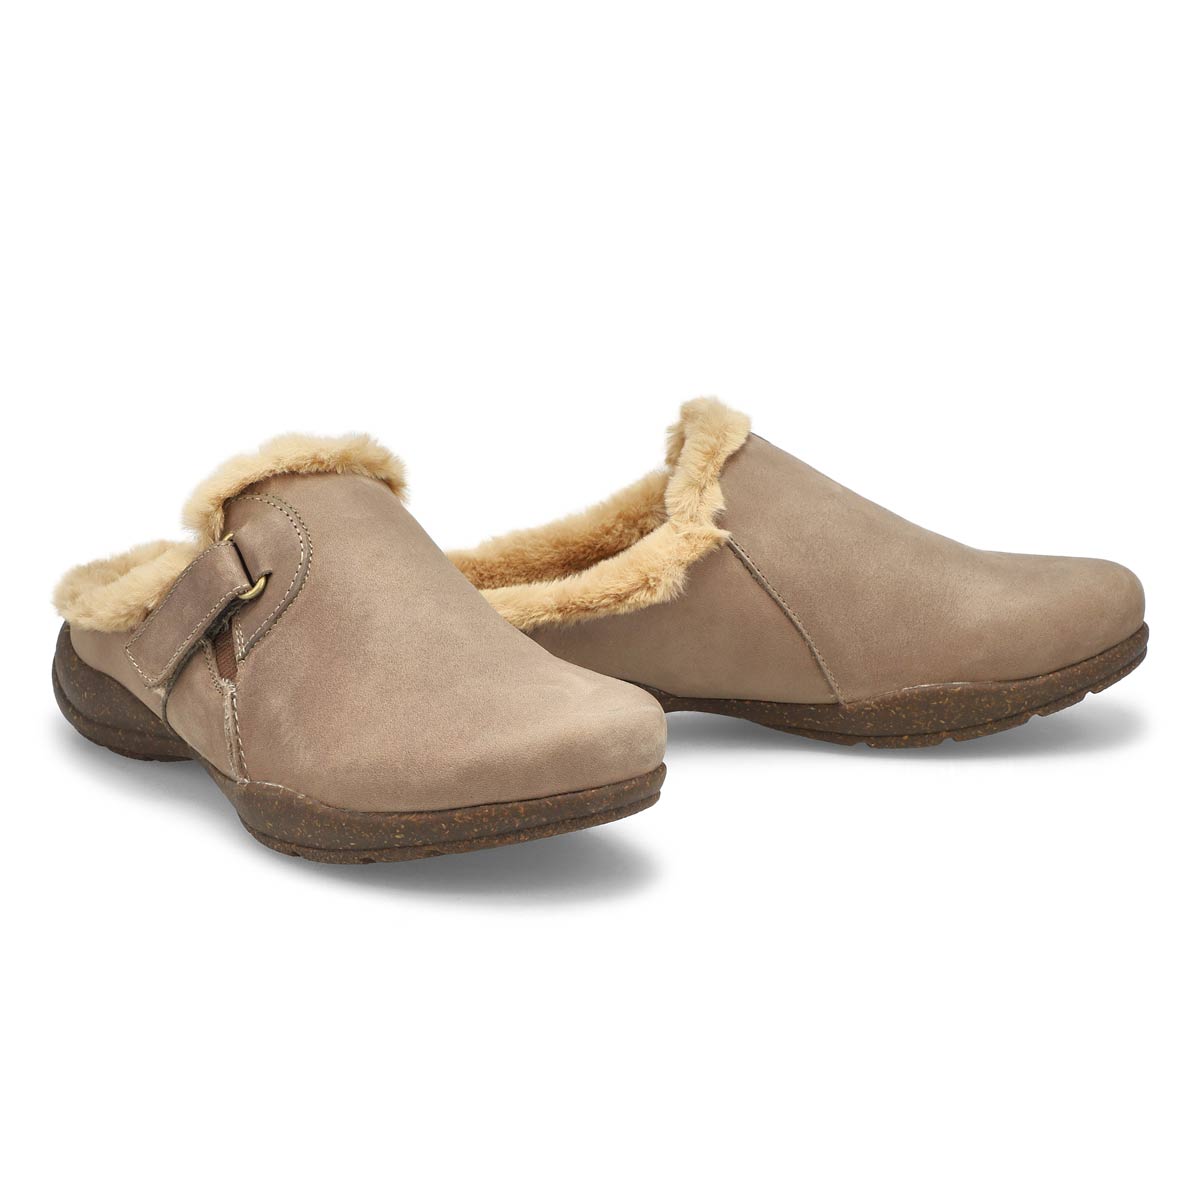 Women's Roseville Low Wedge Wide Clog - Dark Taupe